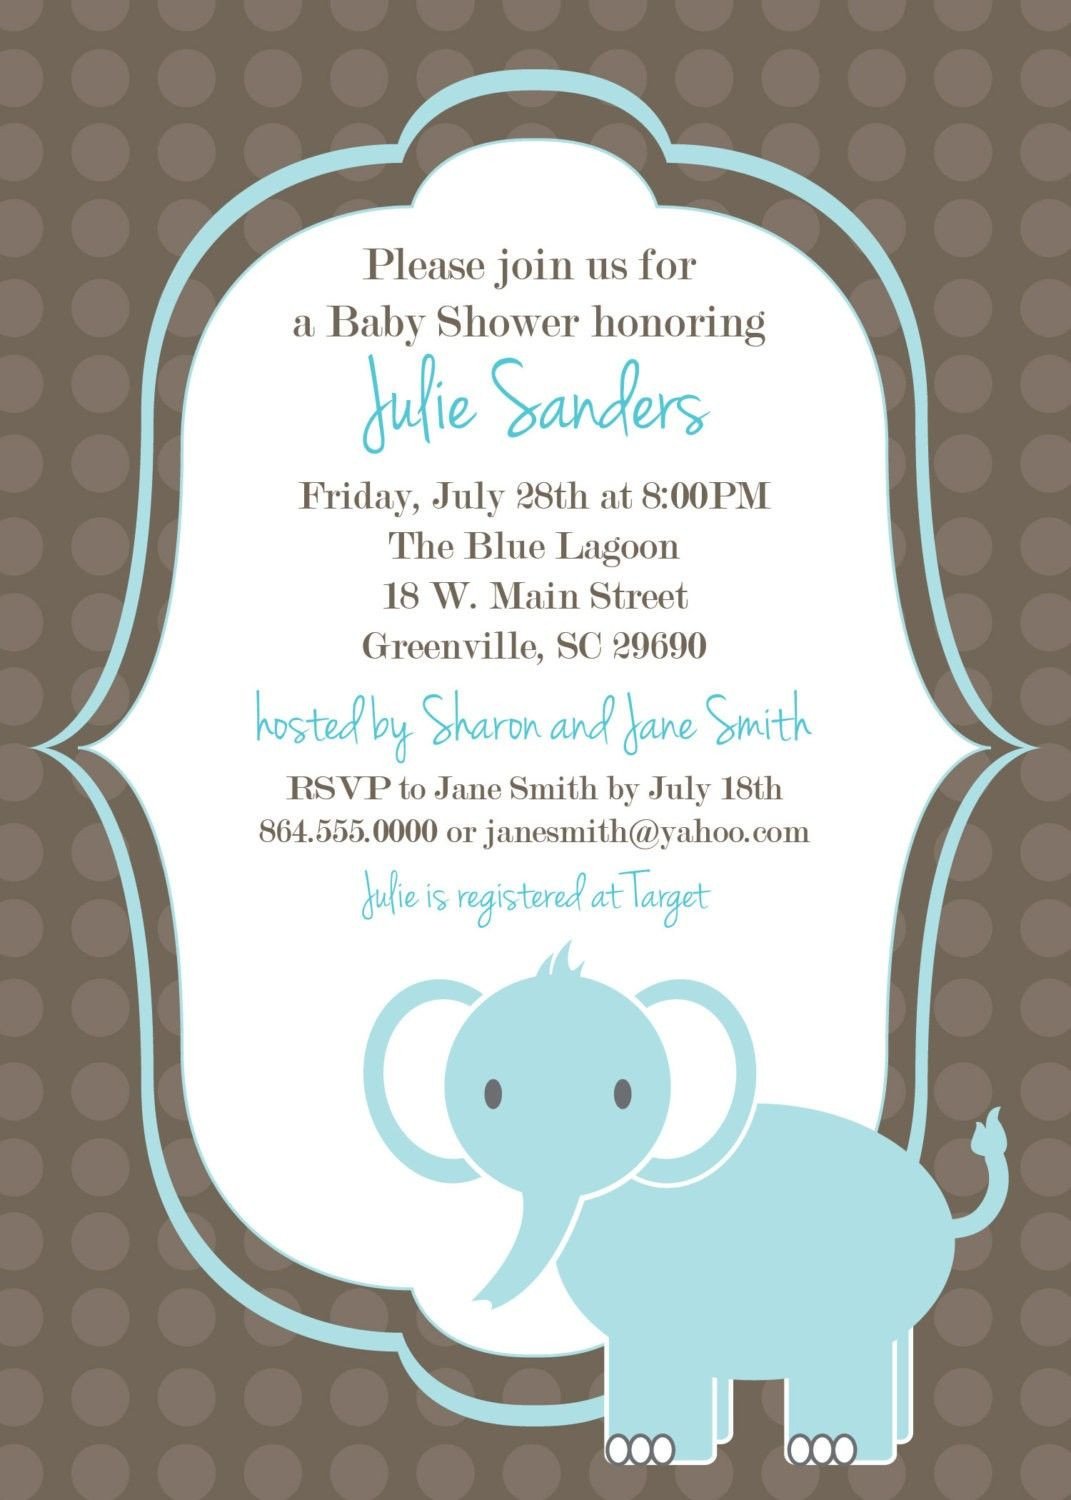 Baby Shower Invitation Template Download Free Template Got the Free Baby Shower